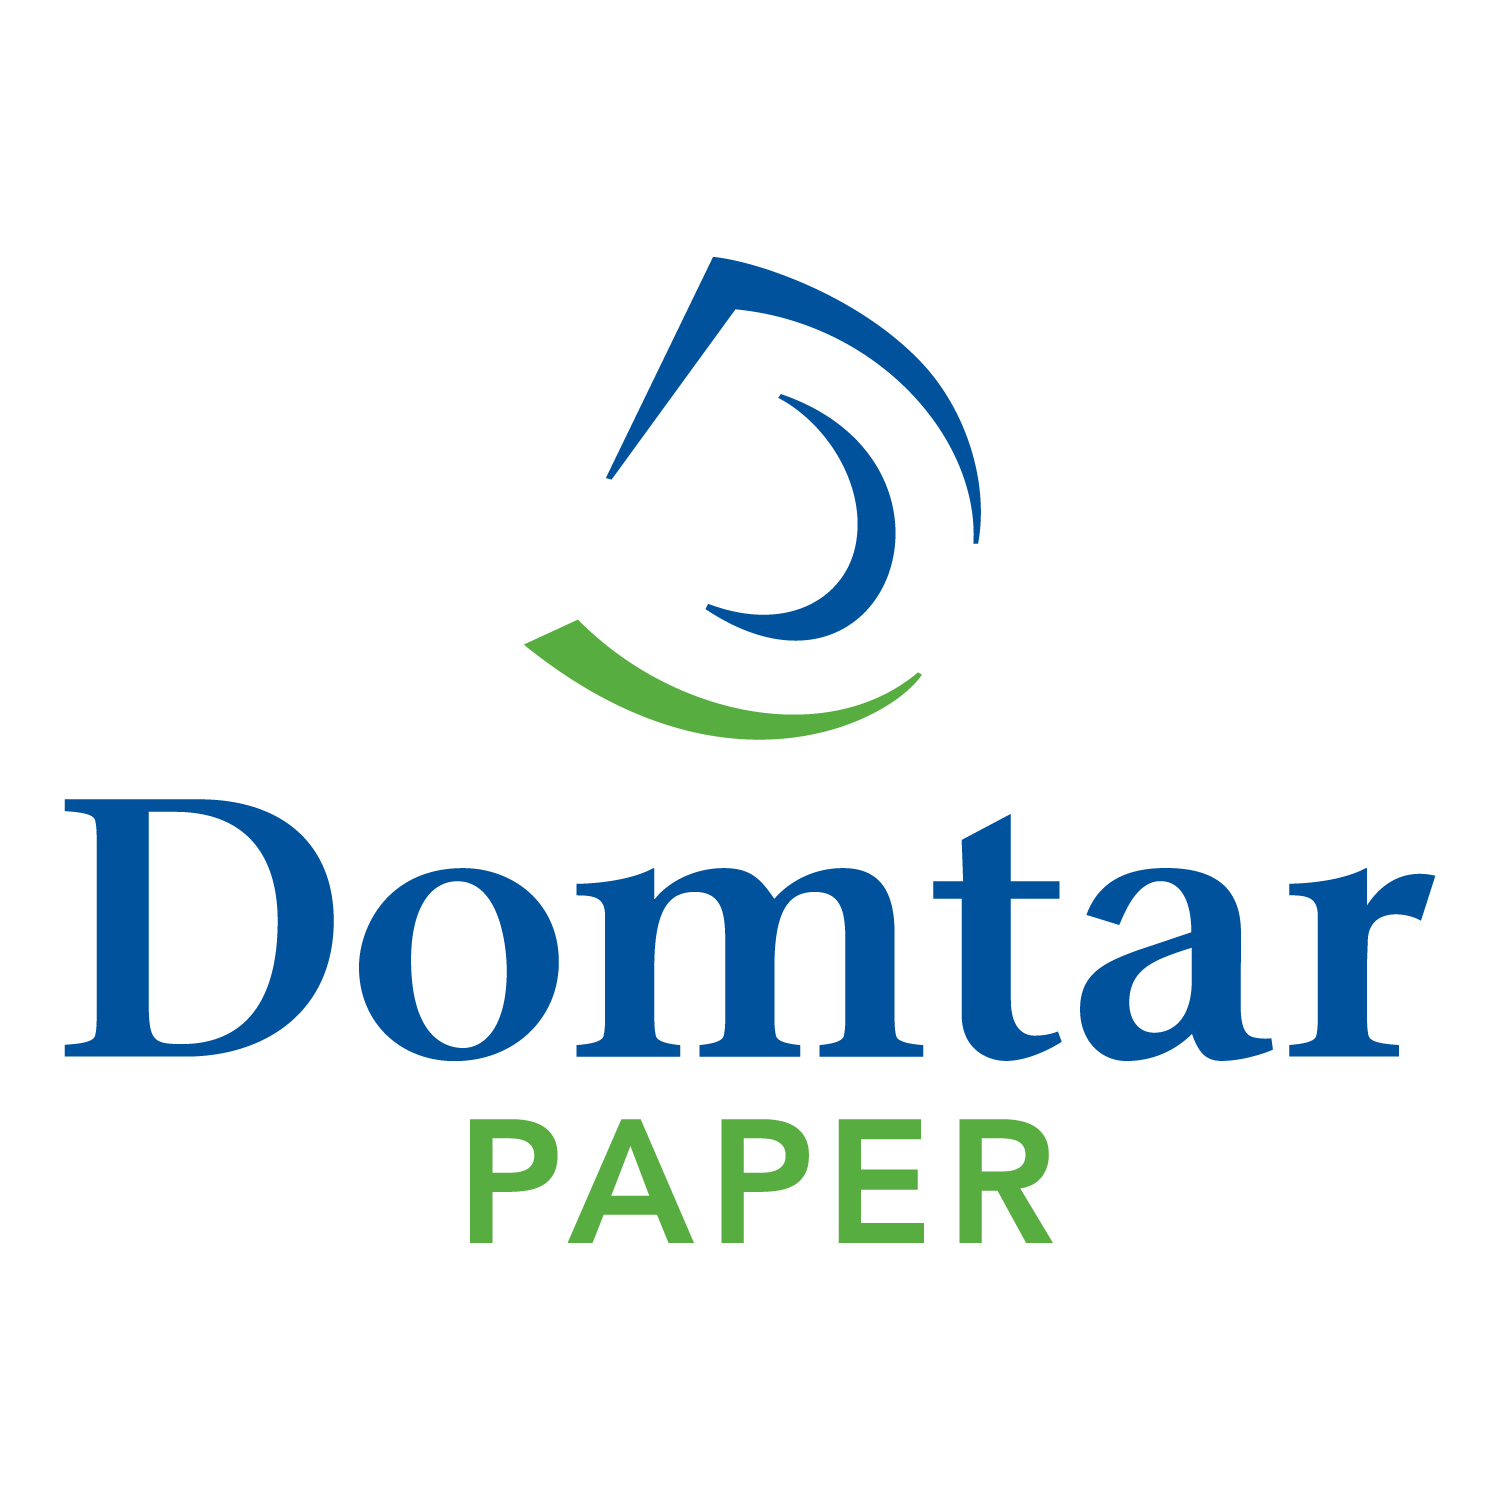 domtar.png